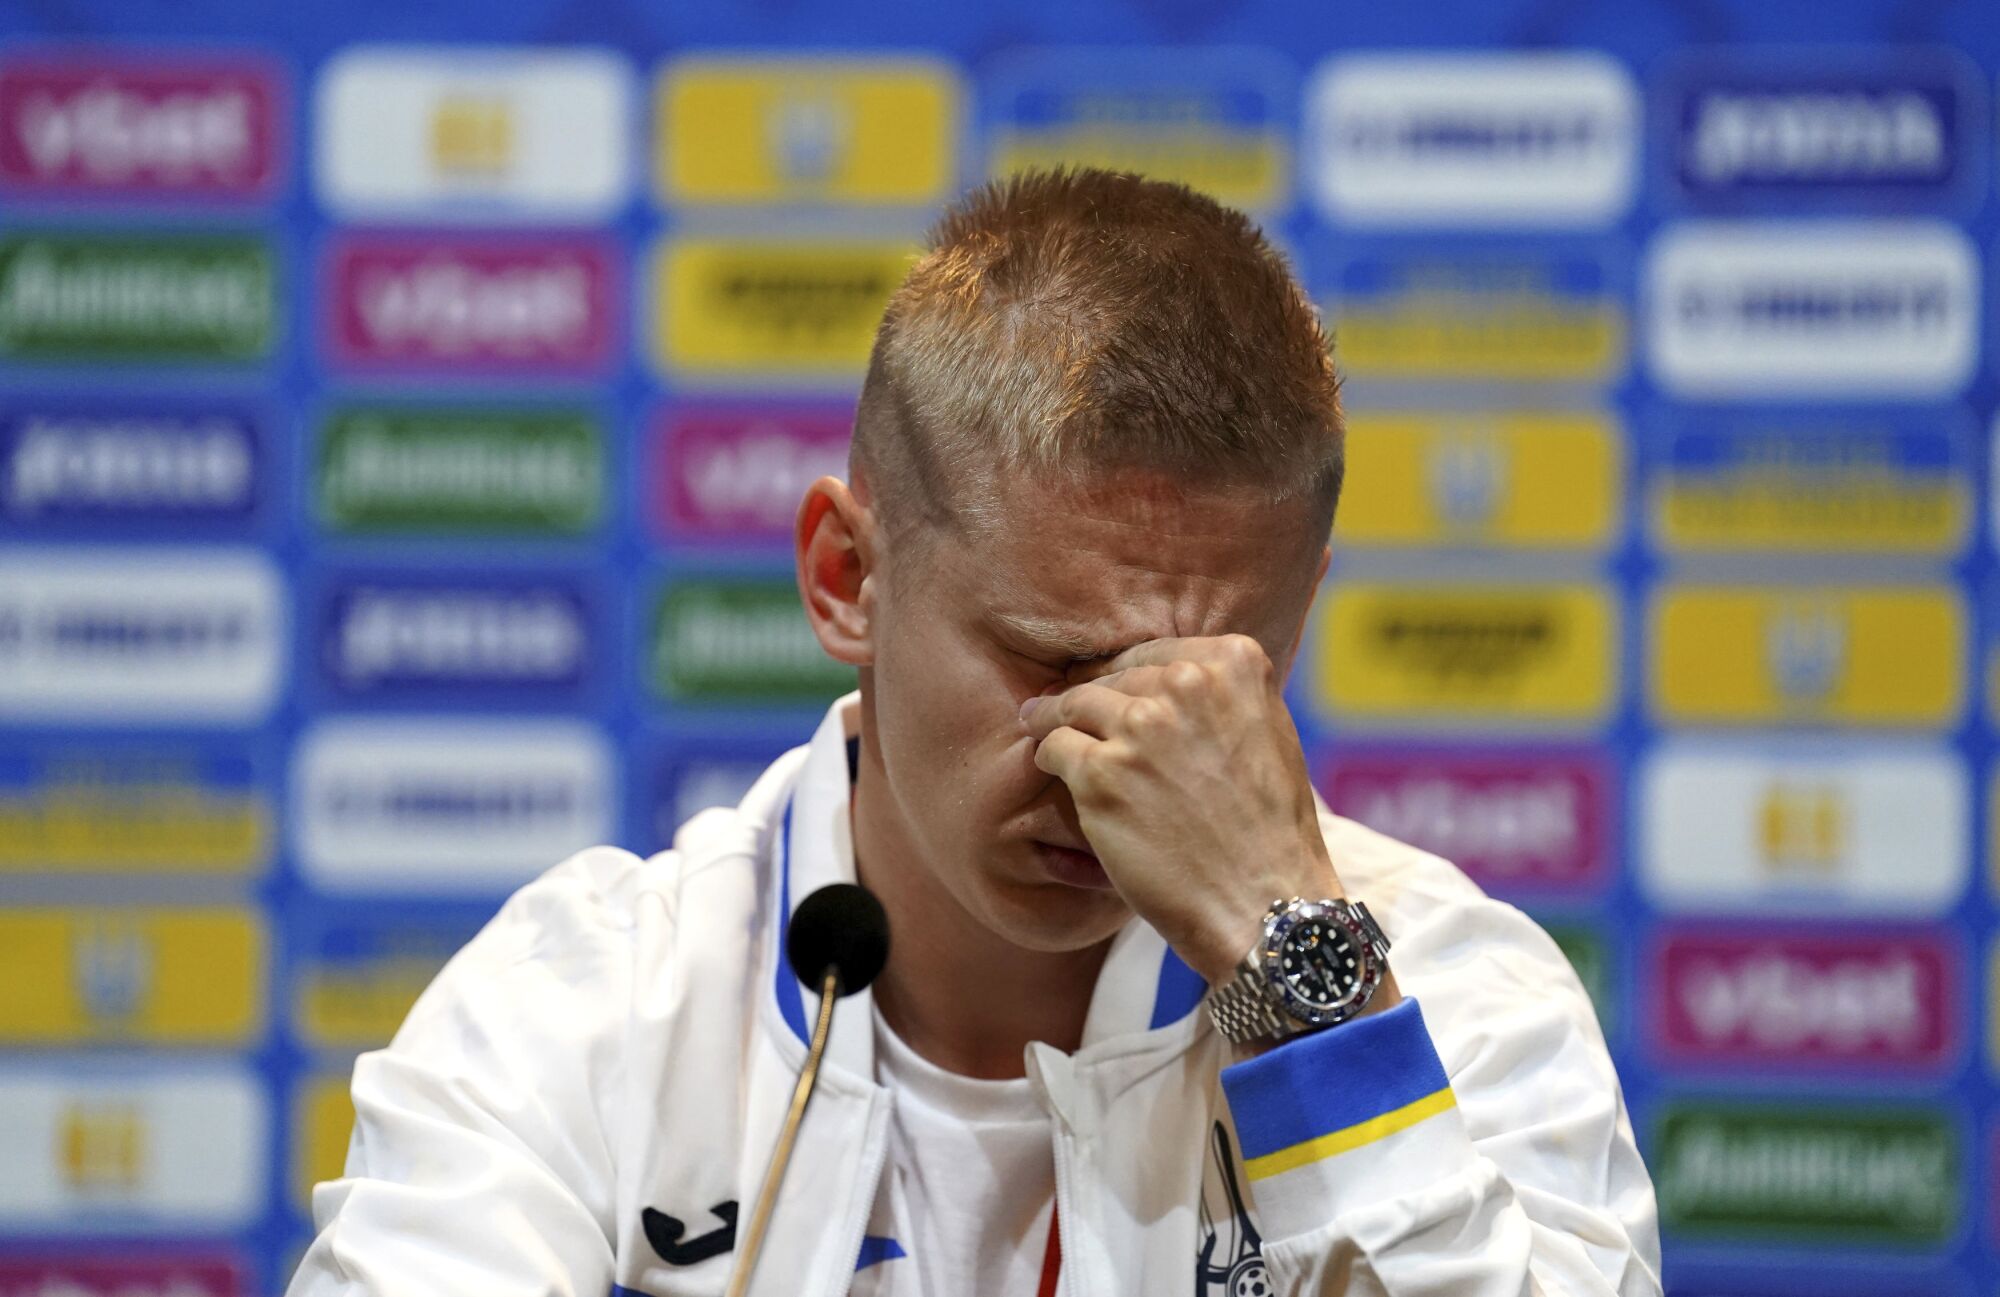 Ukraine's Oleksandr Zinchenko reacts during a news conference May 31 at Hampden Park, in Glasgow, Scotland.